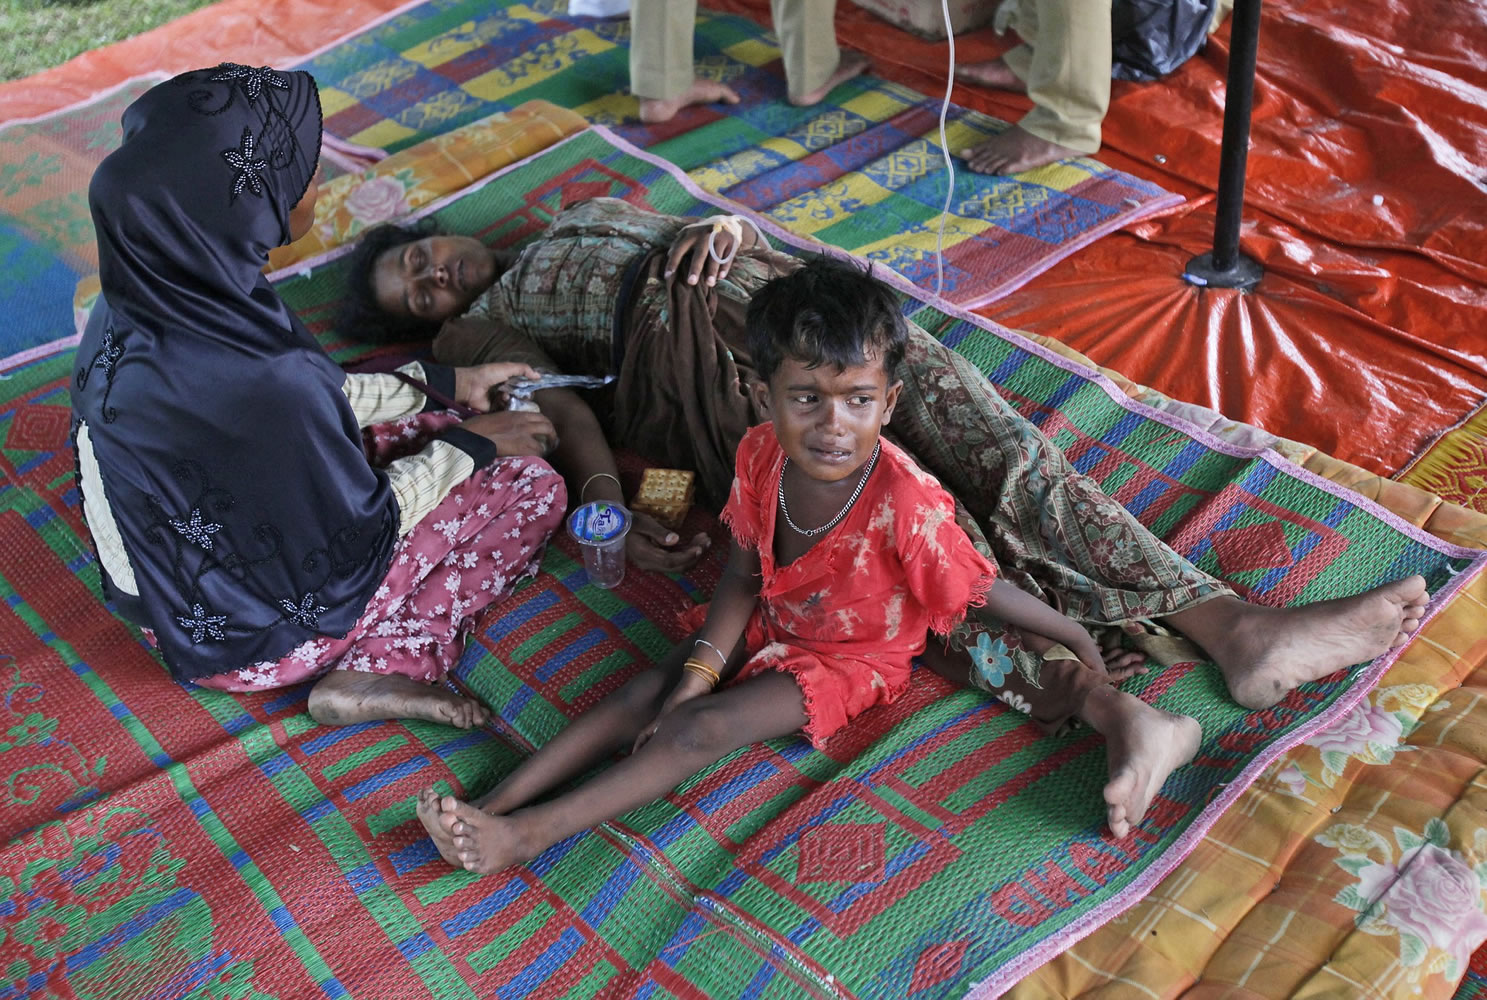 A Rohingya girl cries next to her sick mother Thursday at a temporary shelter in Bayeun, Indonesia.